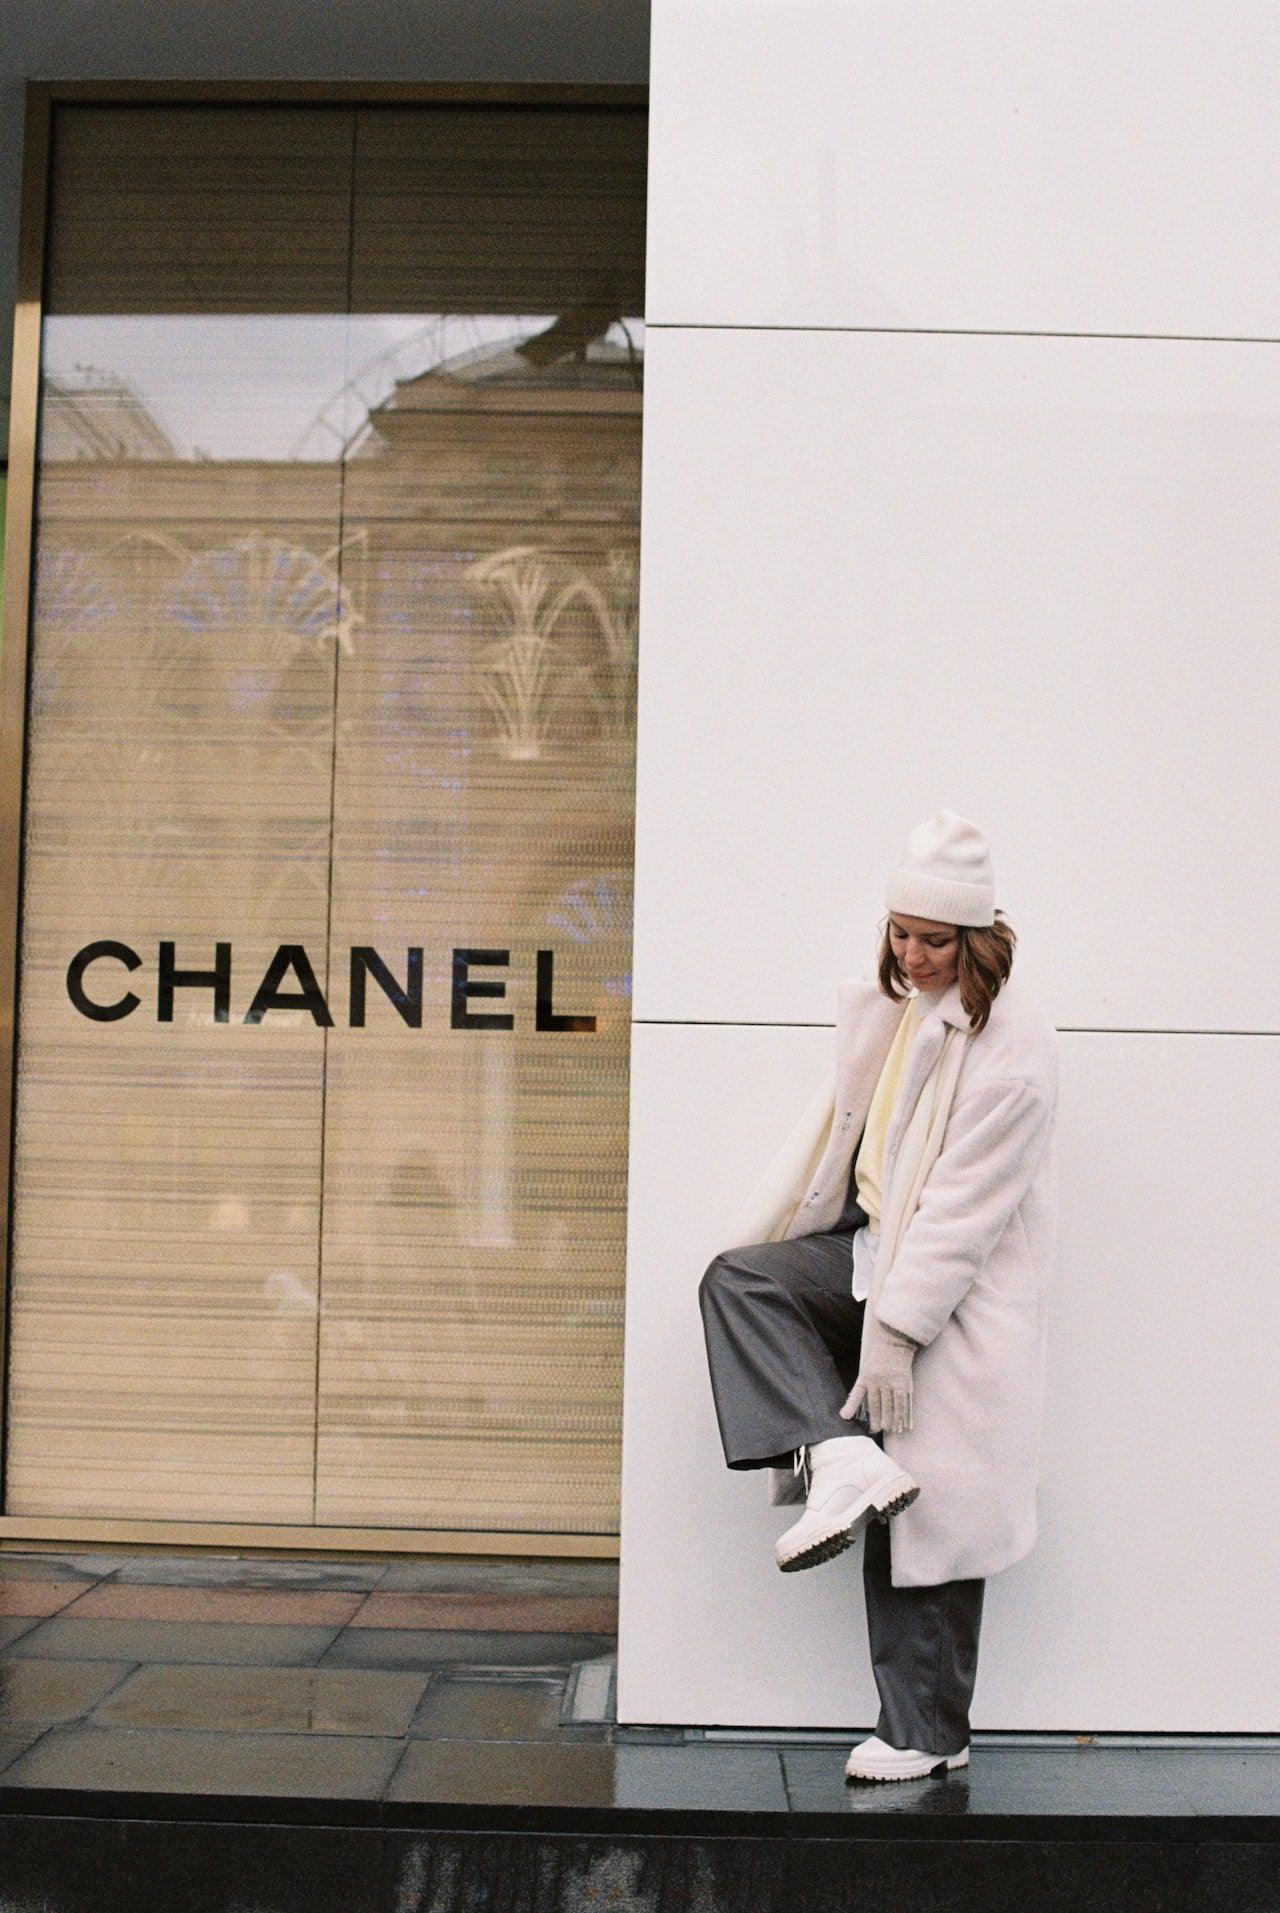 NEW ARRIVALS CHANEL – Only Authentics